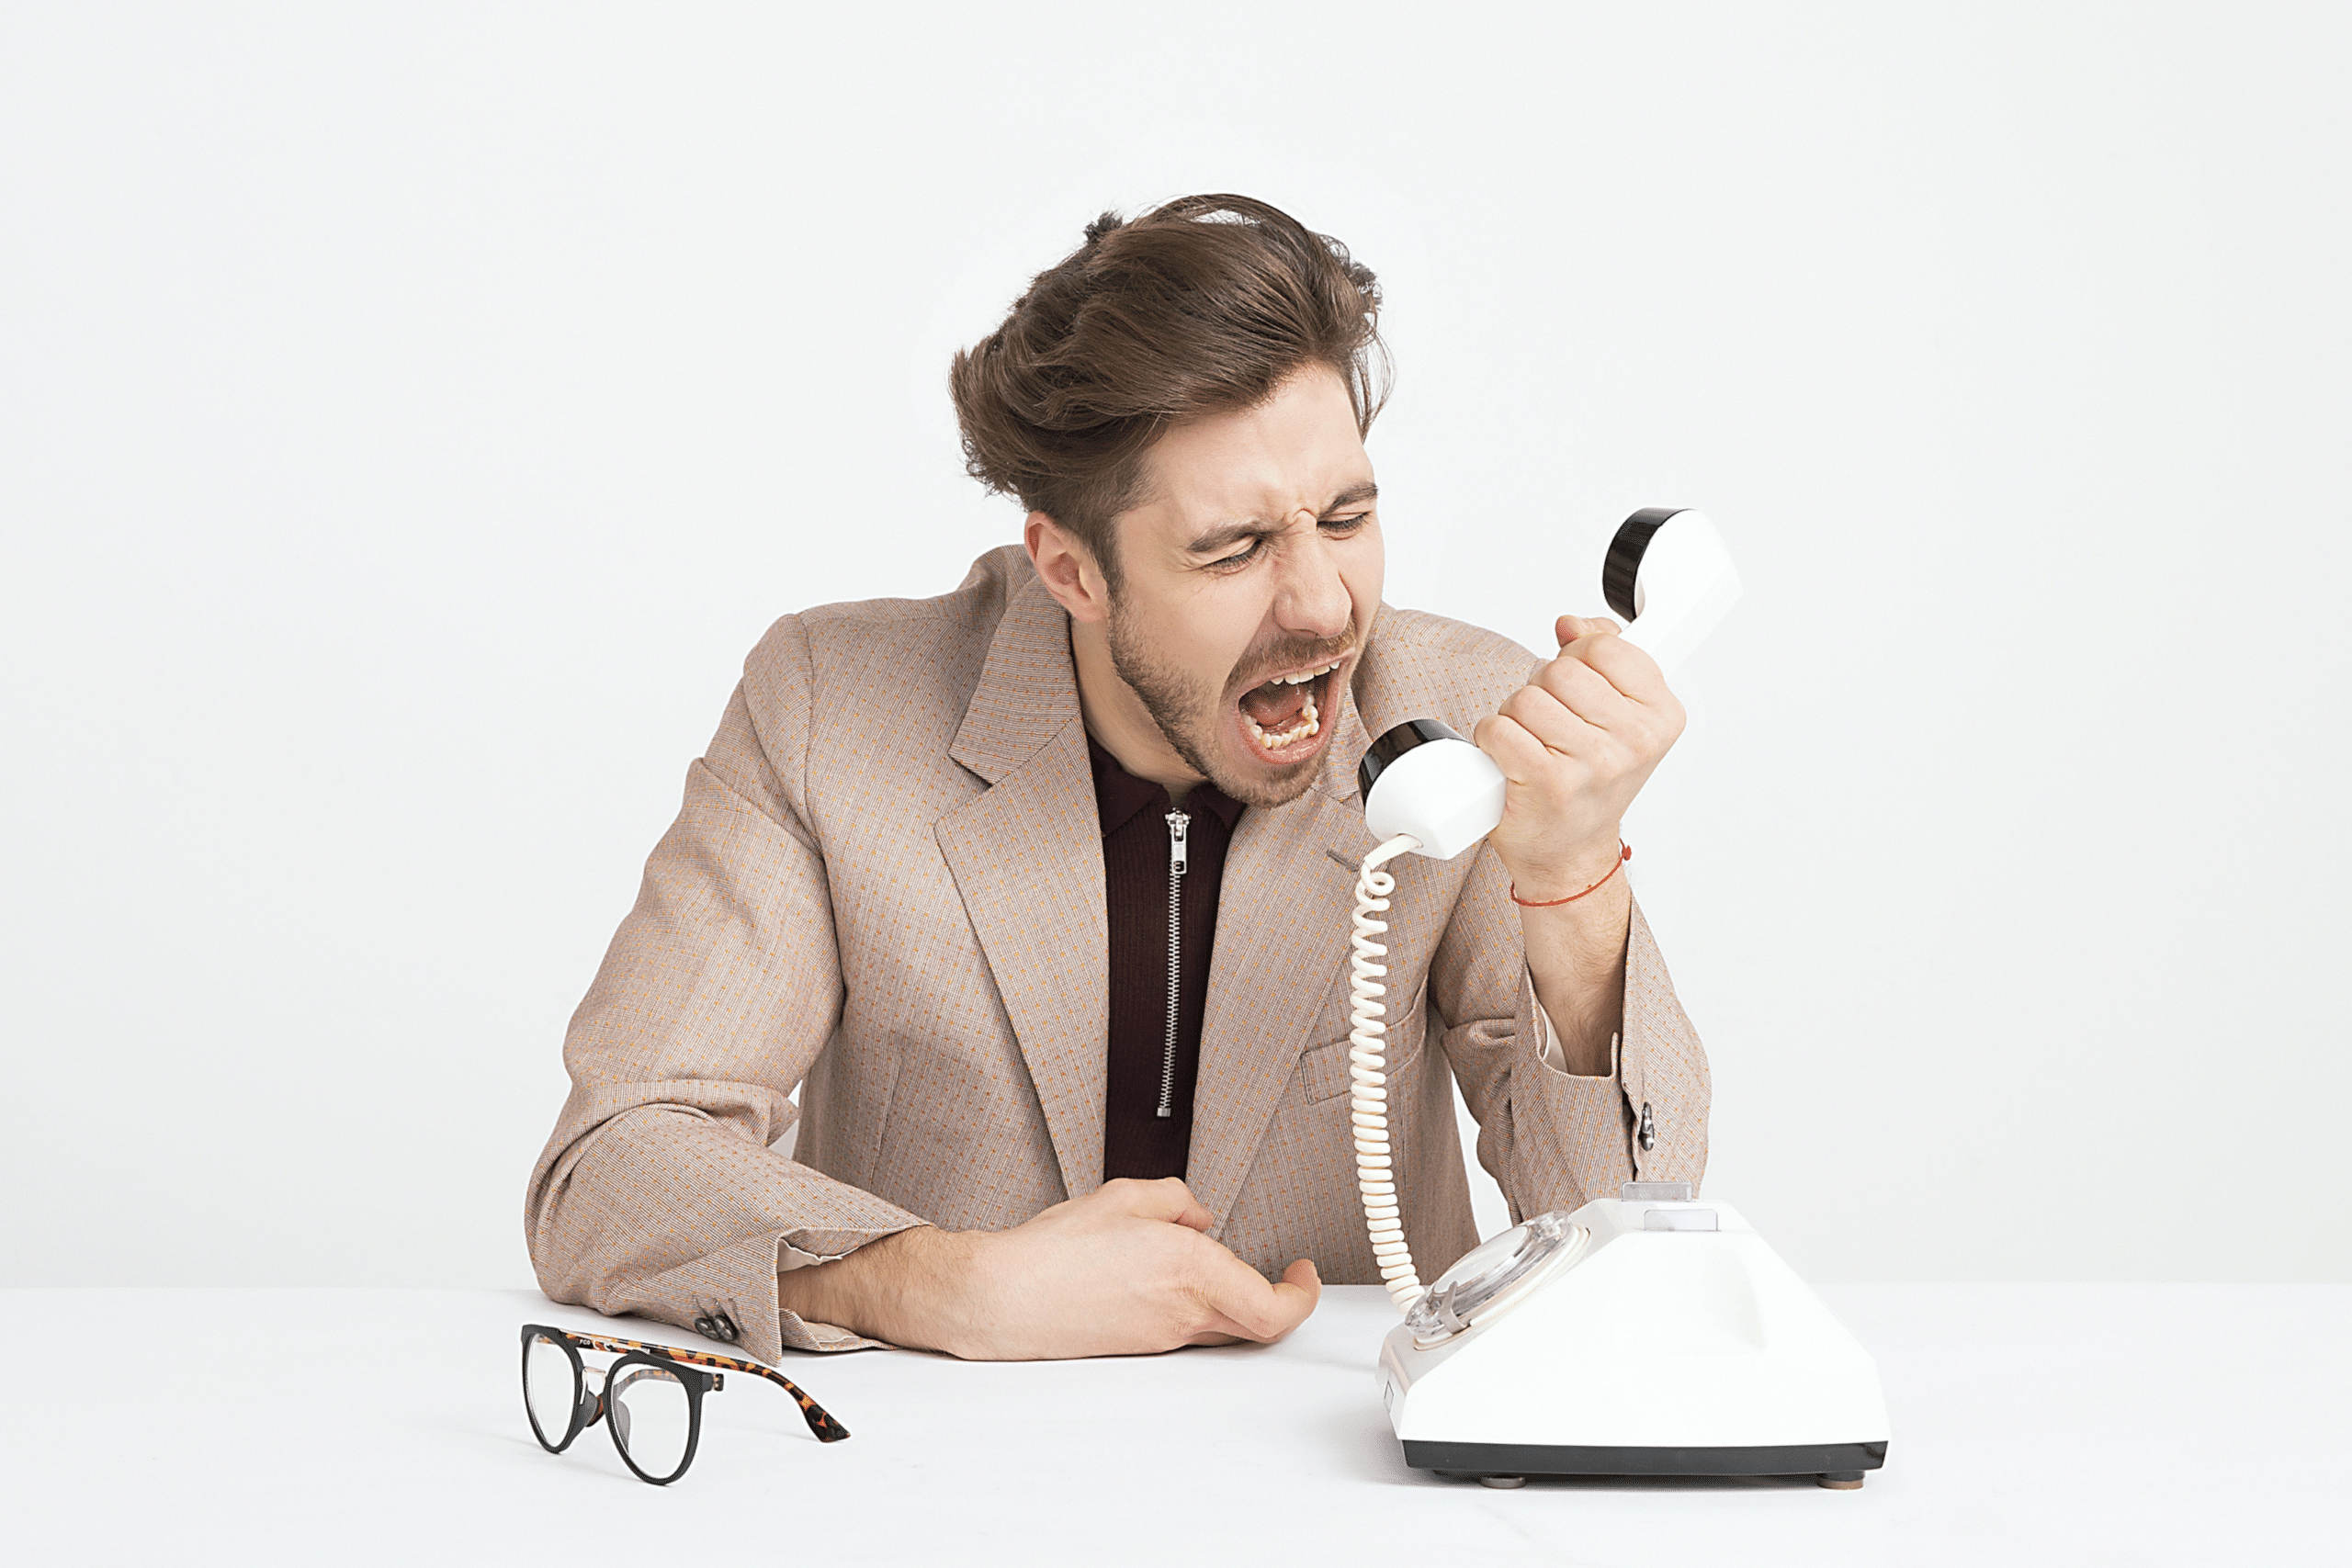 Man yelling into a phone